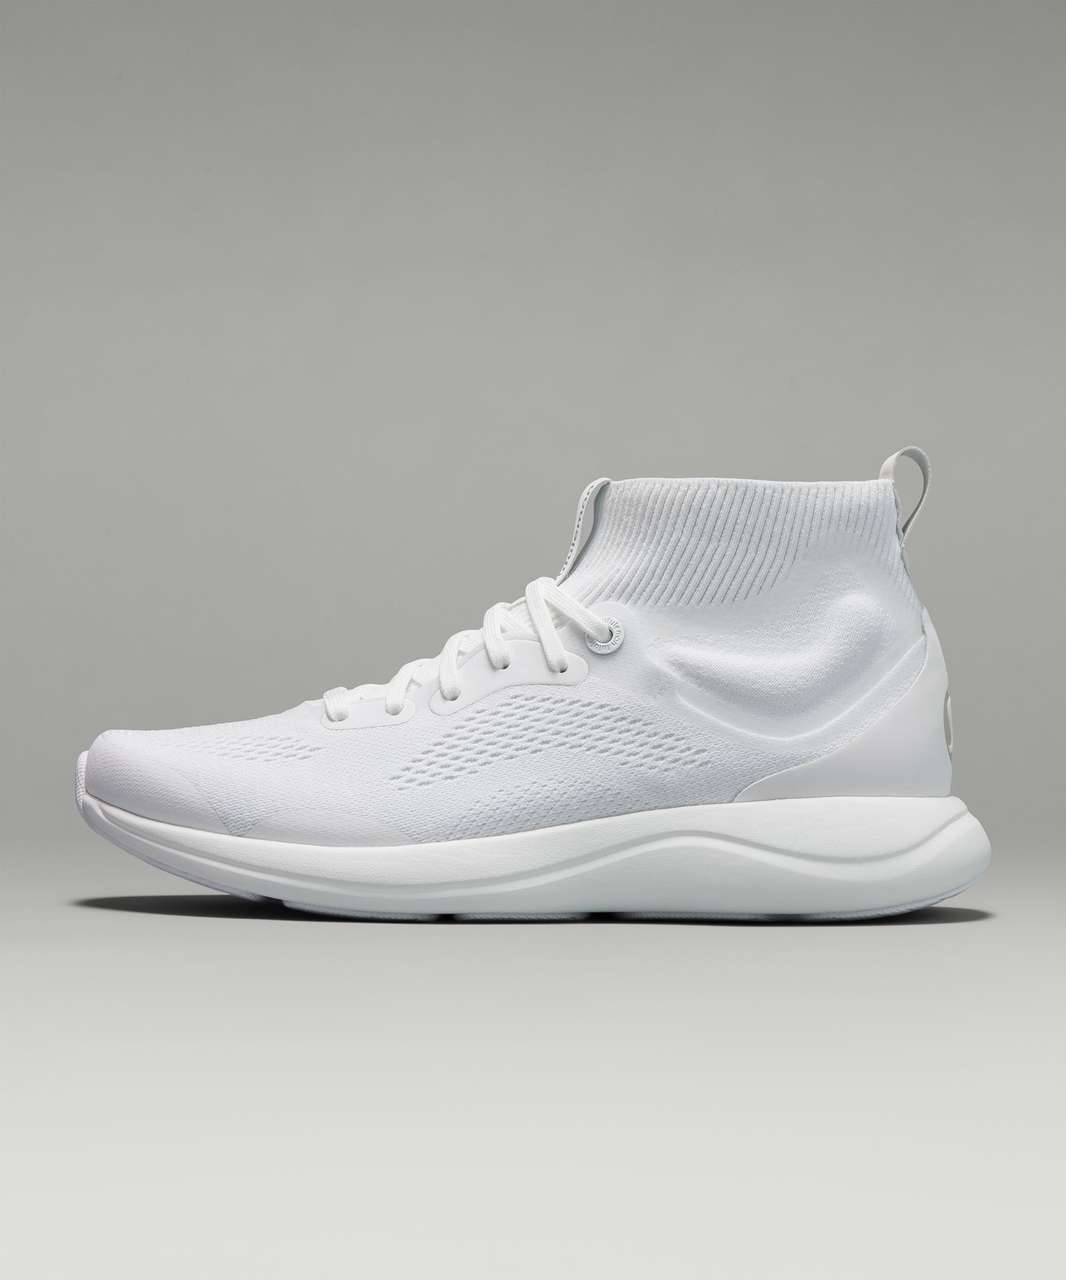 Lululemon Chargefeel Mid Womens Workout Shoe - White / Anchor / White